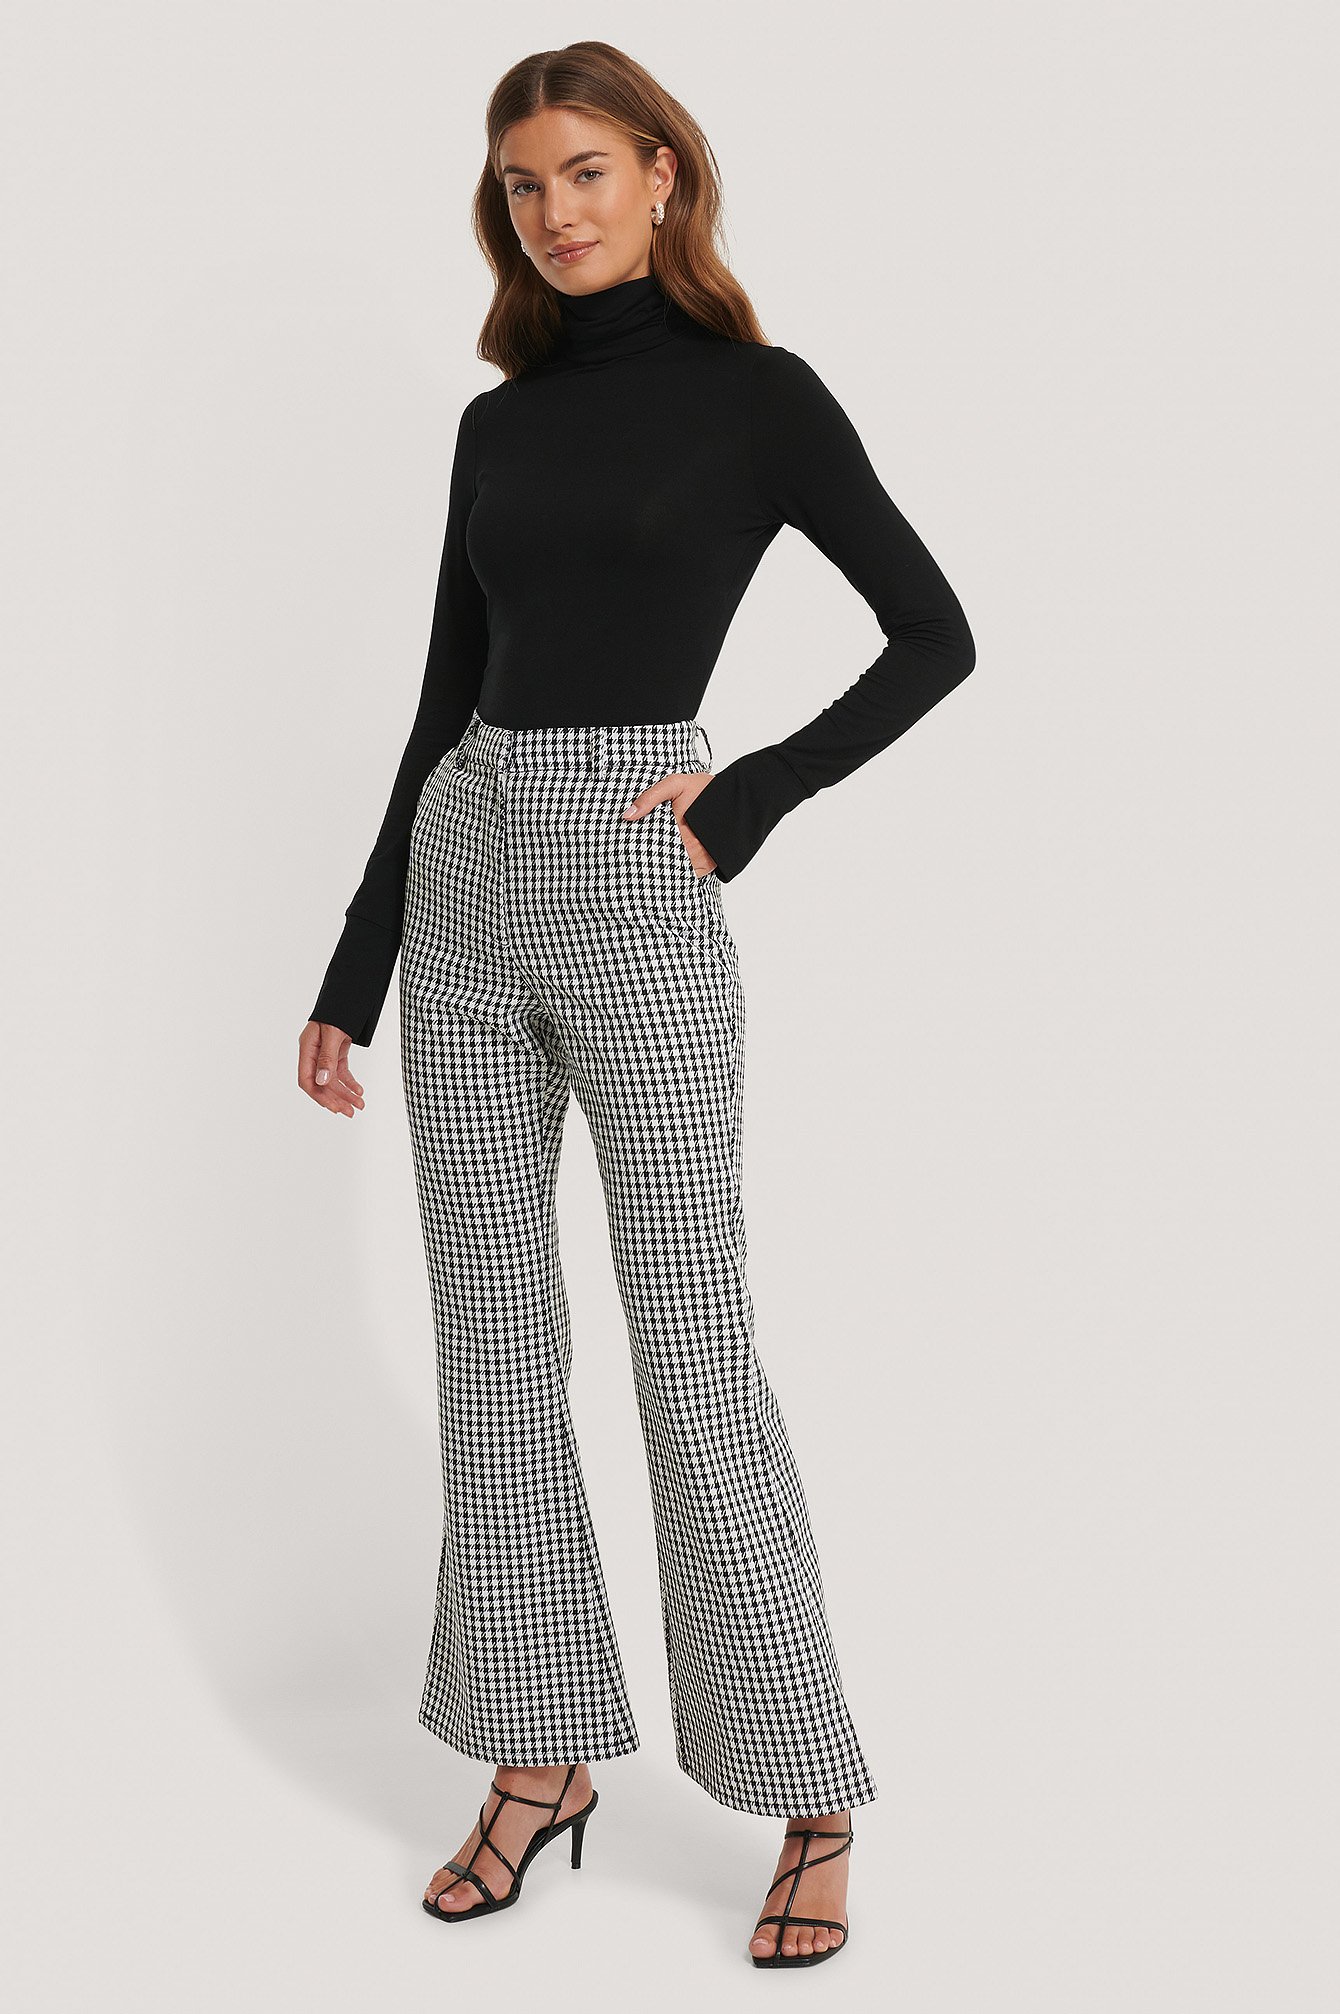 White/Black Flared Houndsthooth Trousers